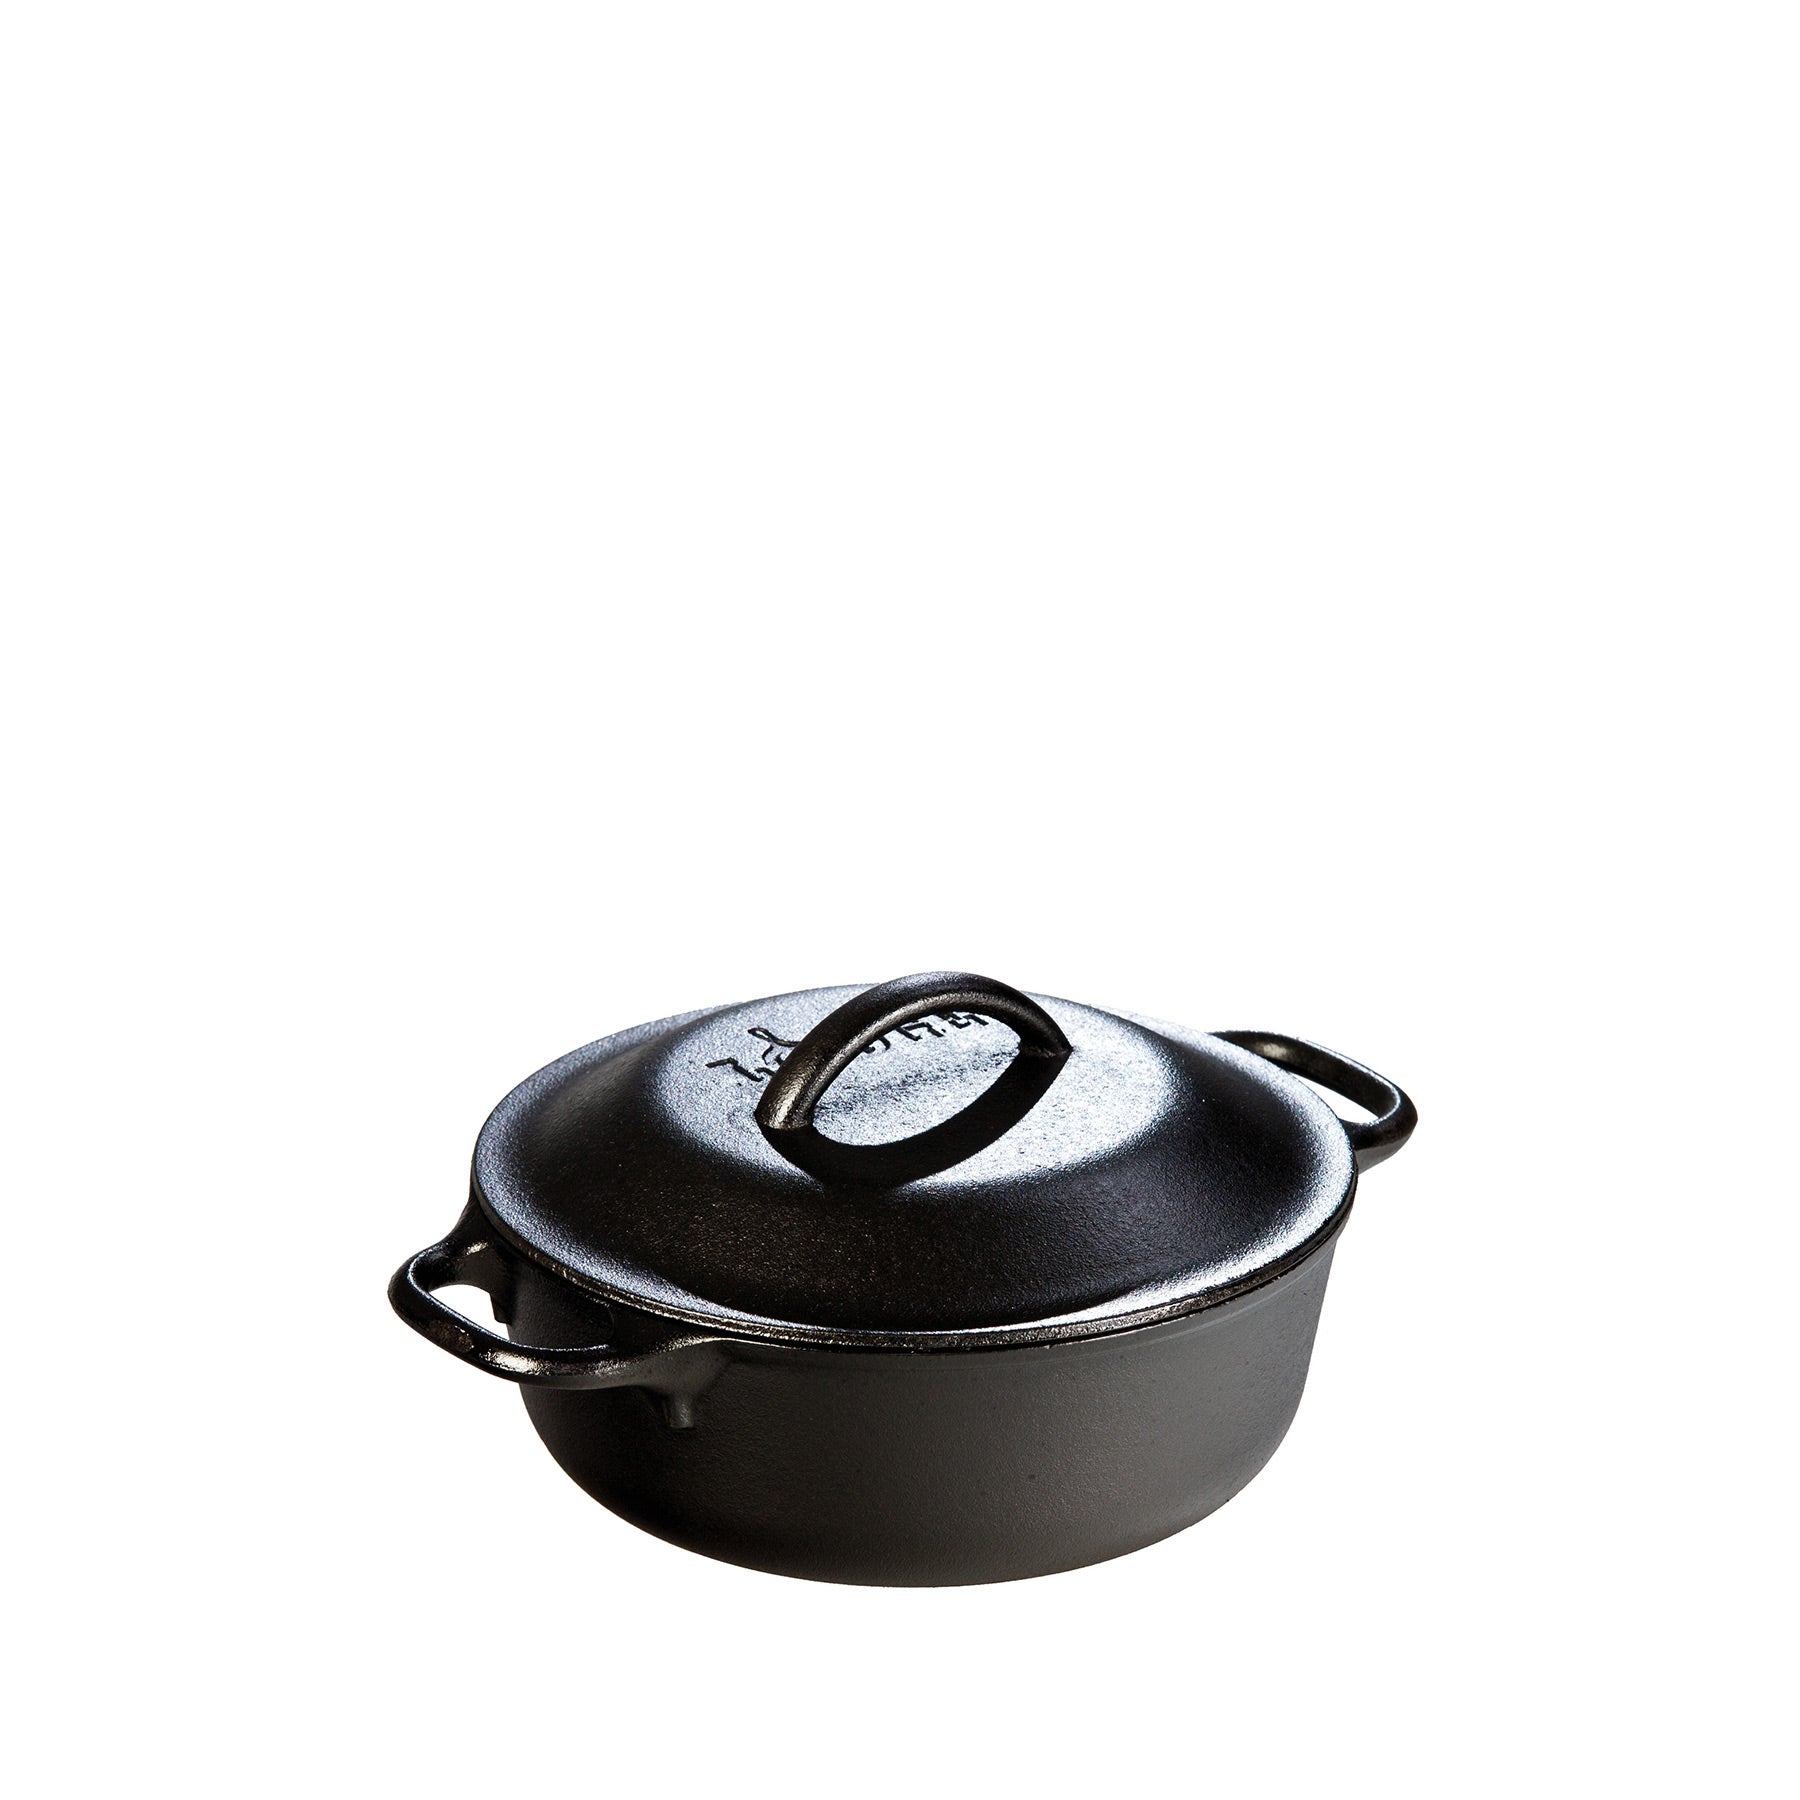 Lodge 2 Quart Cast Iron Dutch Oven. Pre-seasoned Pot with Lid for Cooking